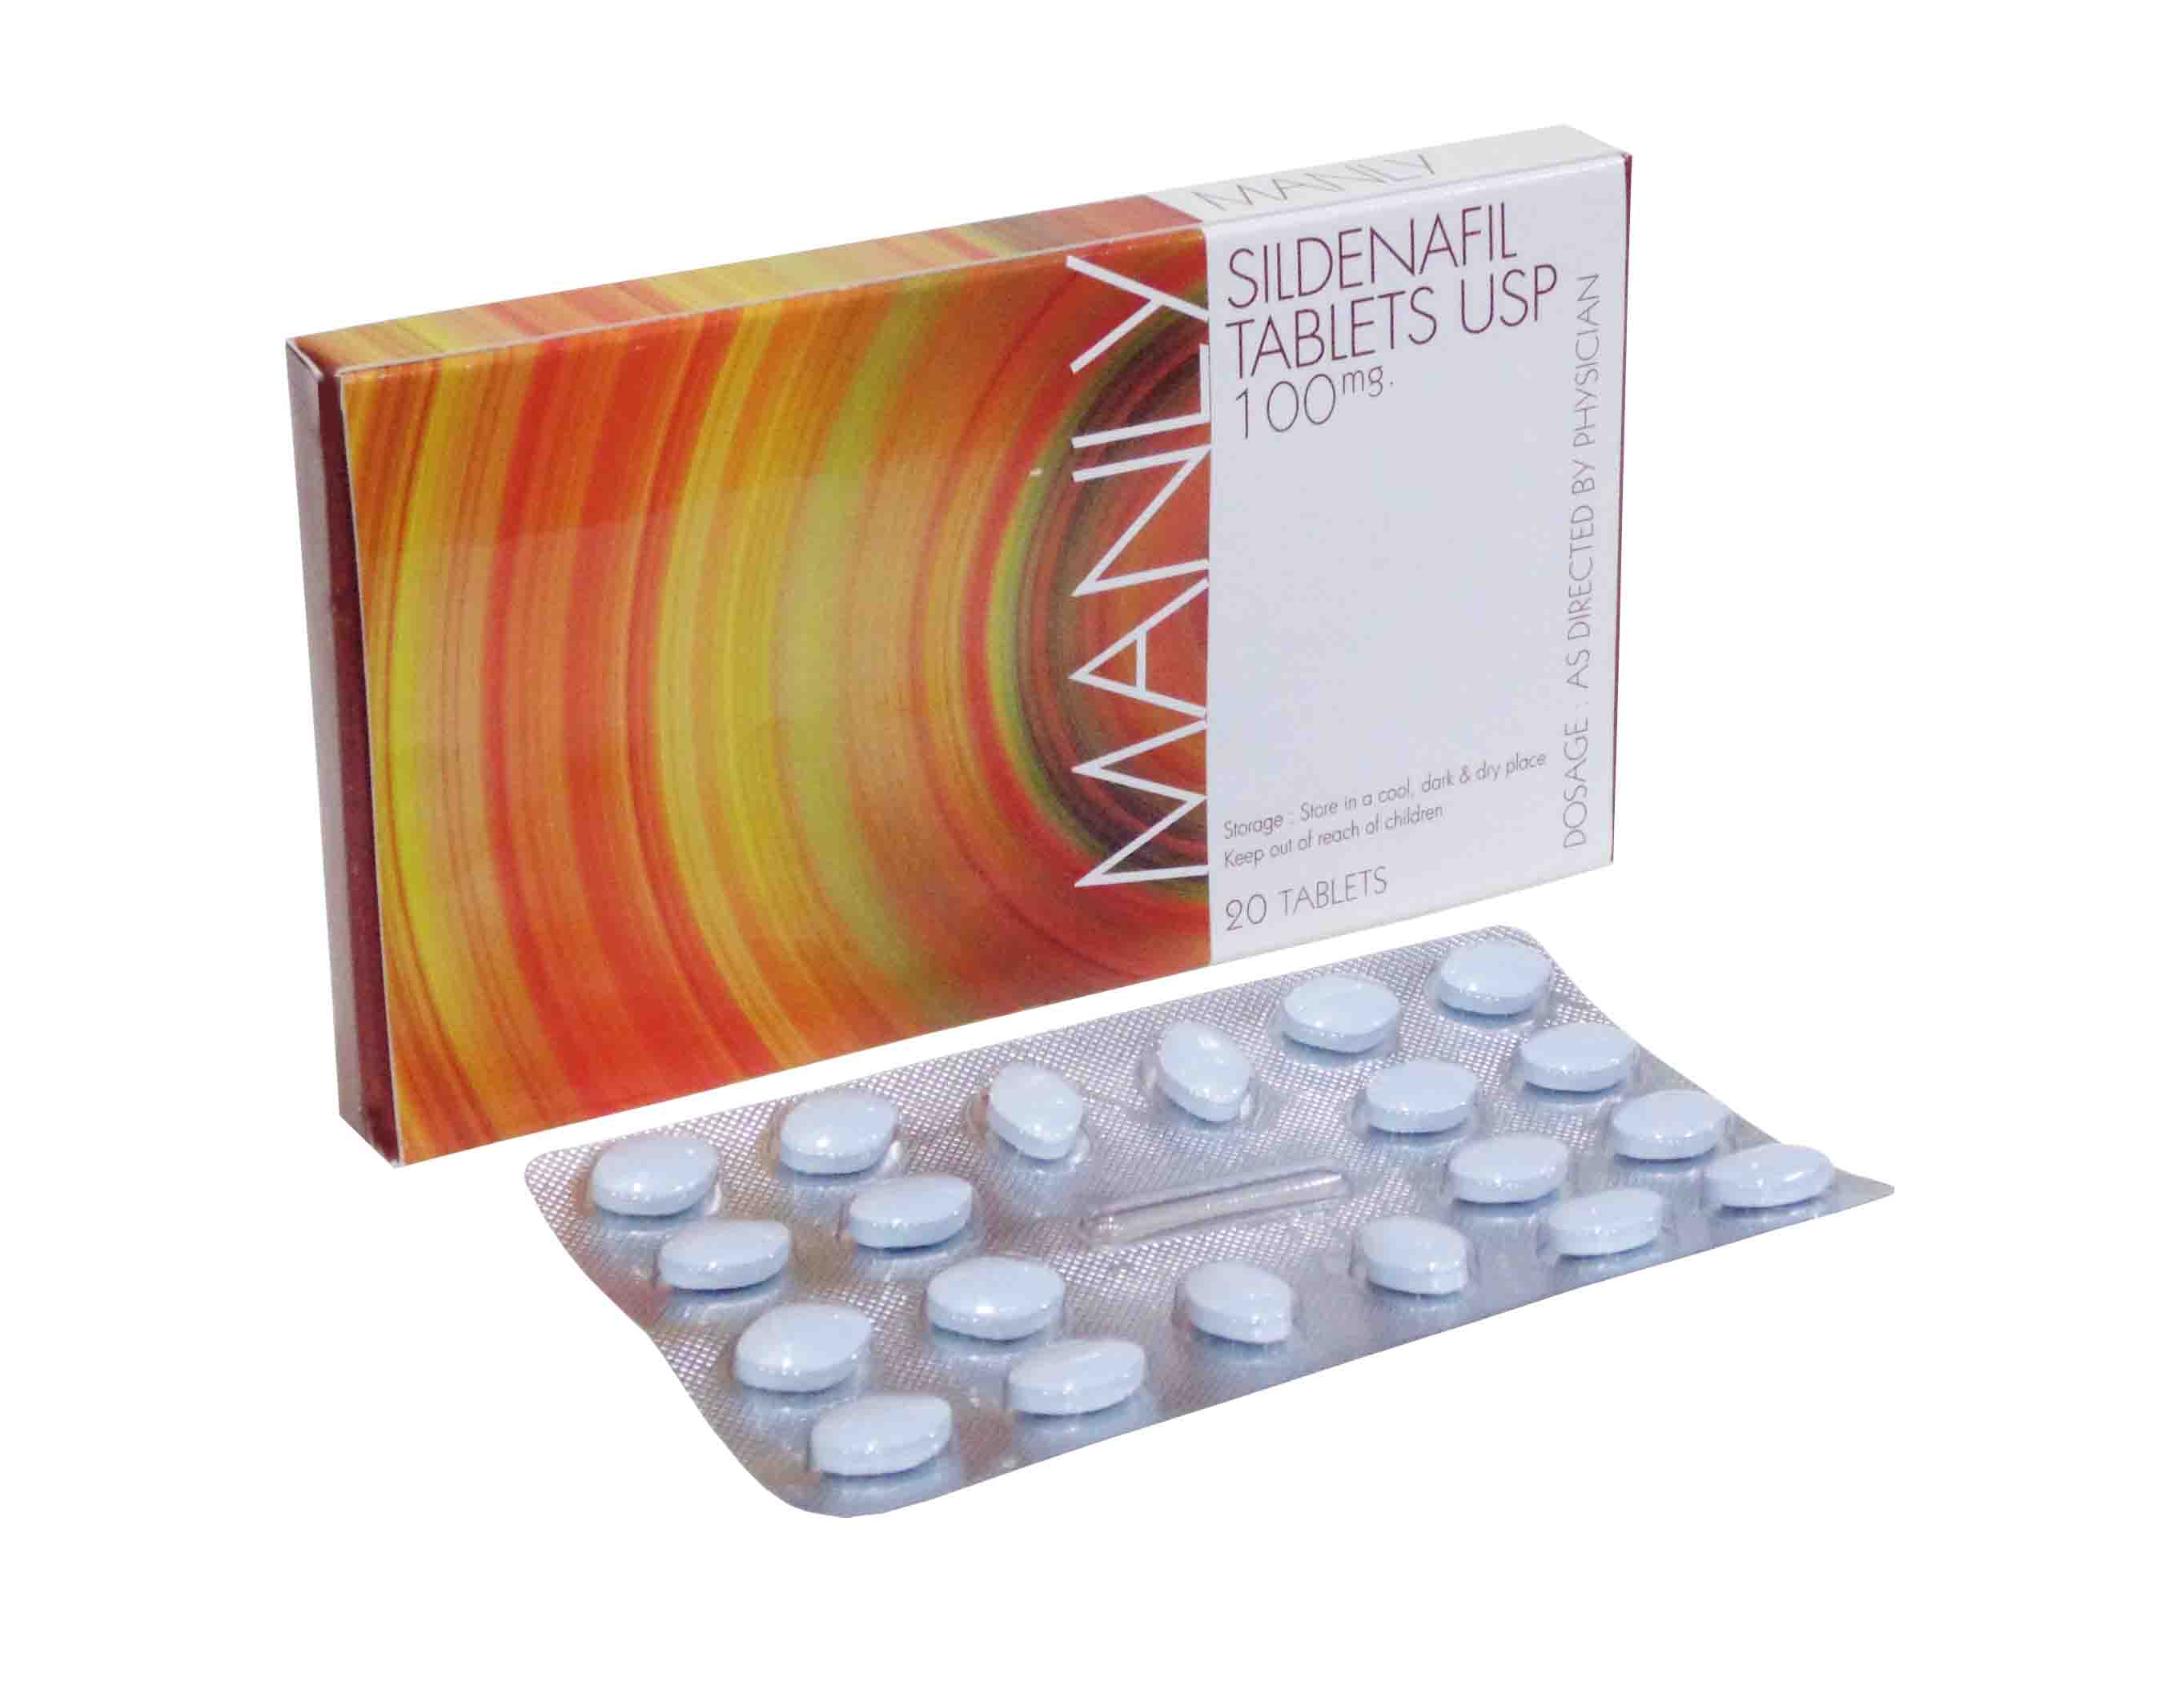 Buy Manly 100mg Sildenafil Tablets Online  Buy Sildenafil Citrate Tablets 100mg  Online - ReliableRx Pharmacy